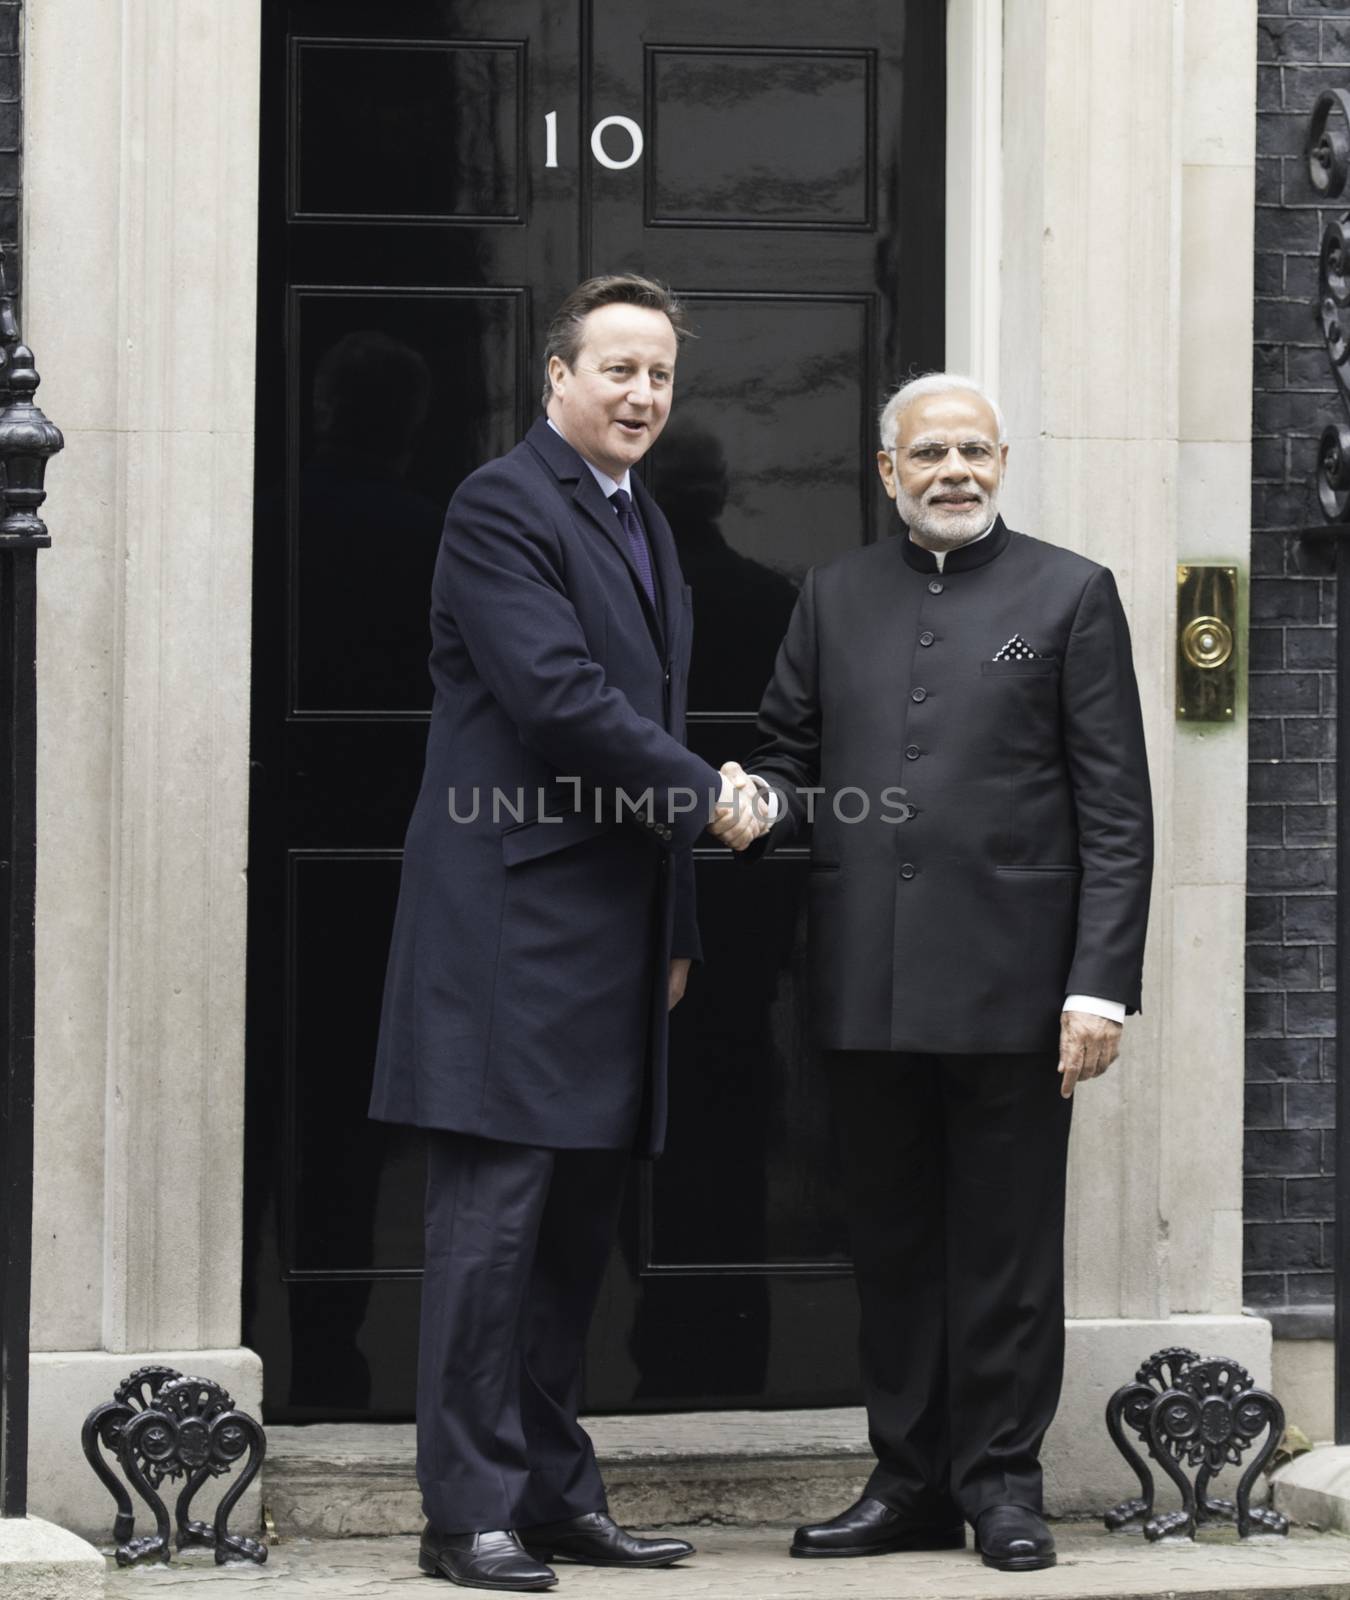 UK, London: Indian Prime Minister Narendra Modi shakes hands with British Prime Minister David Cameron at 10 Downing Street in London on November 12, 2015. Modi's three-day visit marks the first by an Indian Prime Minister in more than a decade.